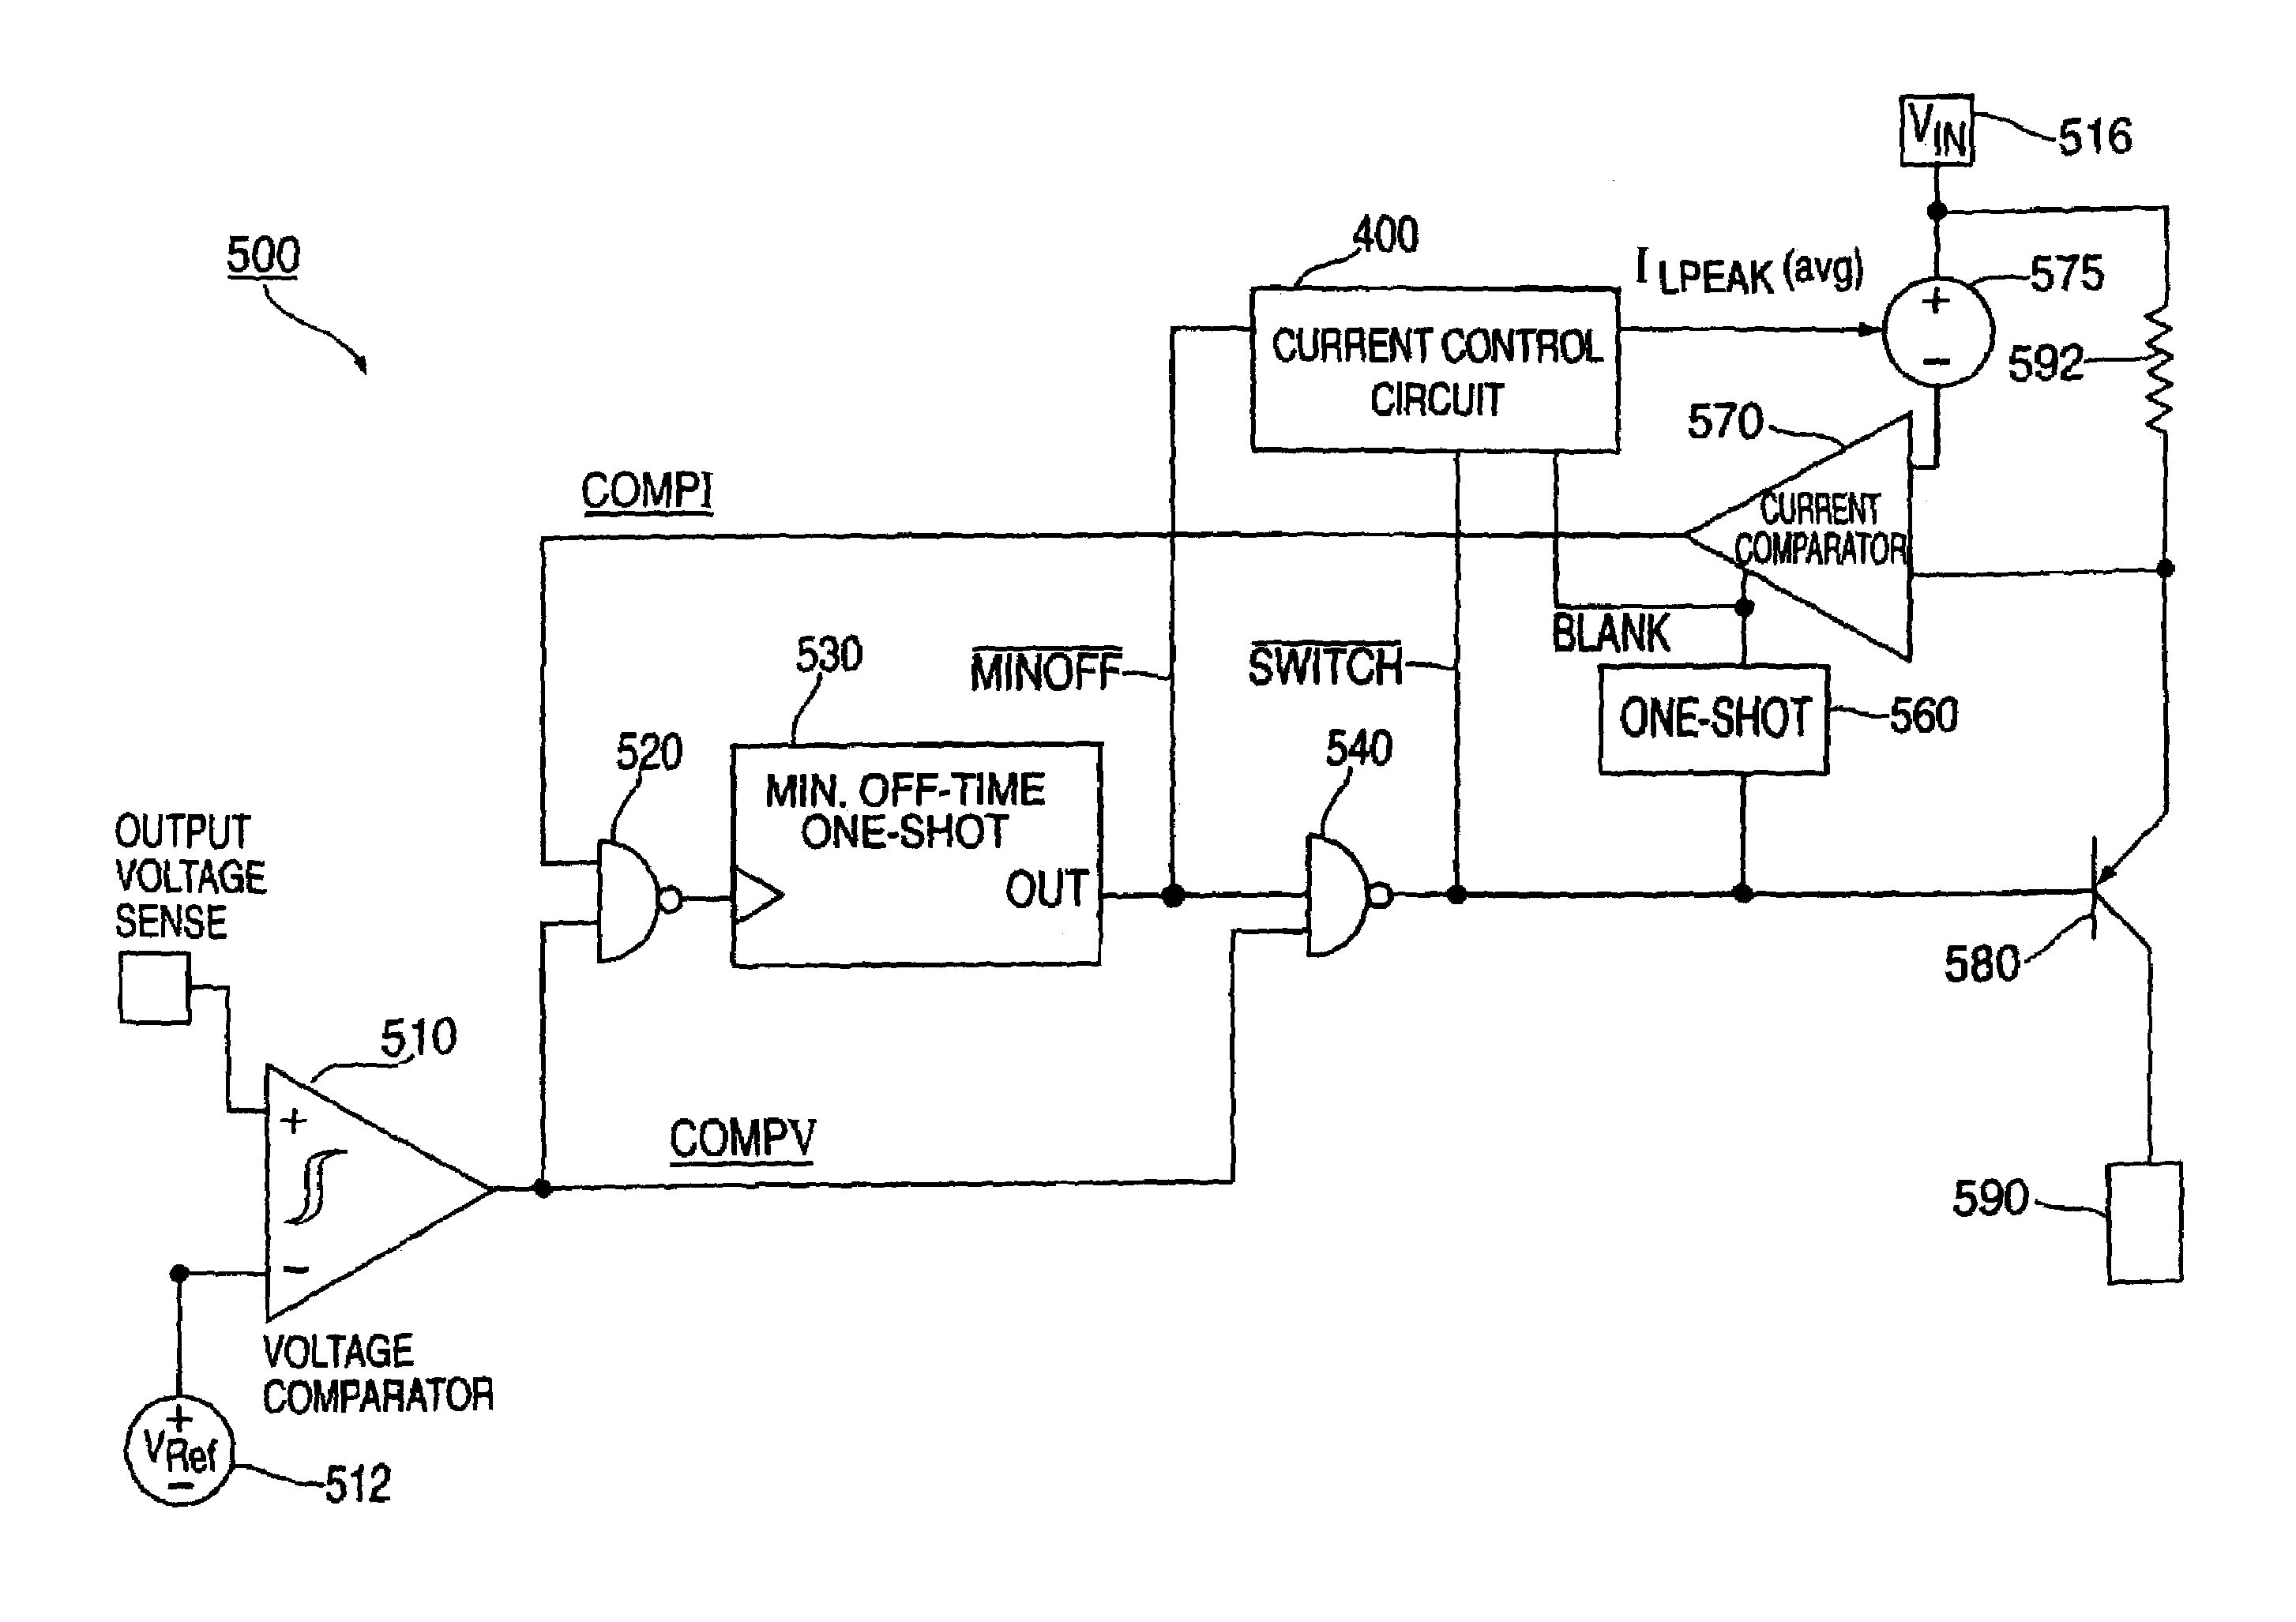 Time-based current control in switching regulators